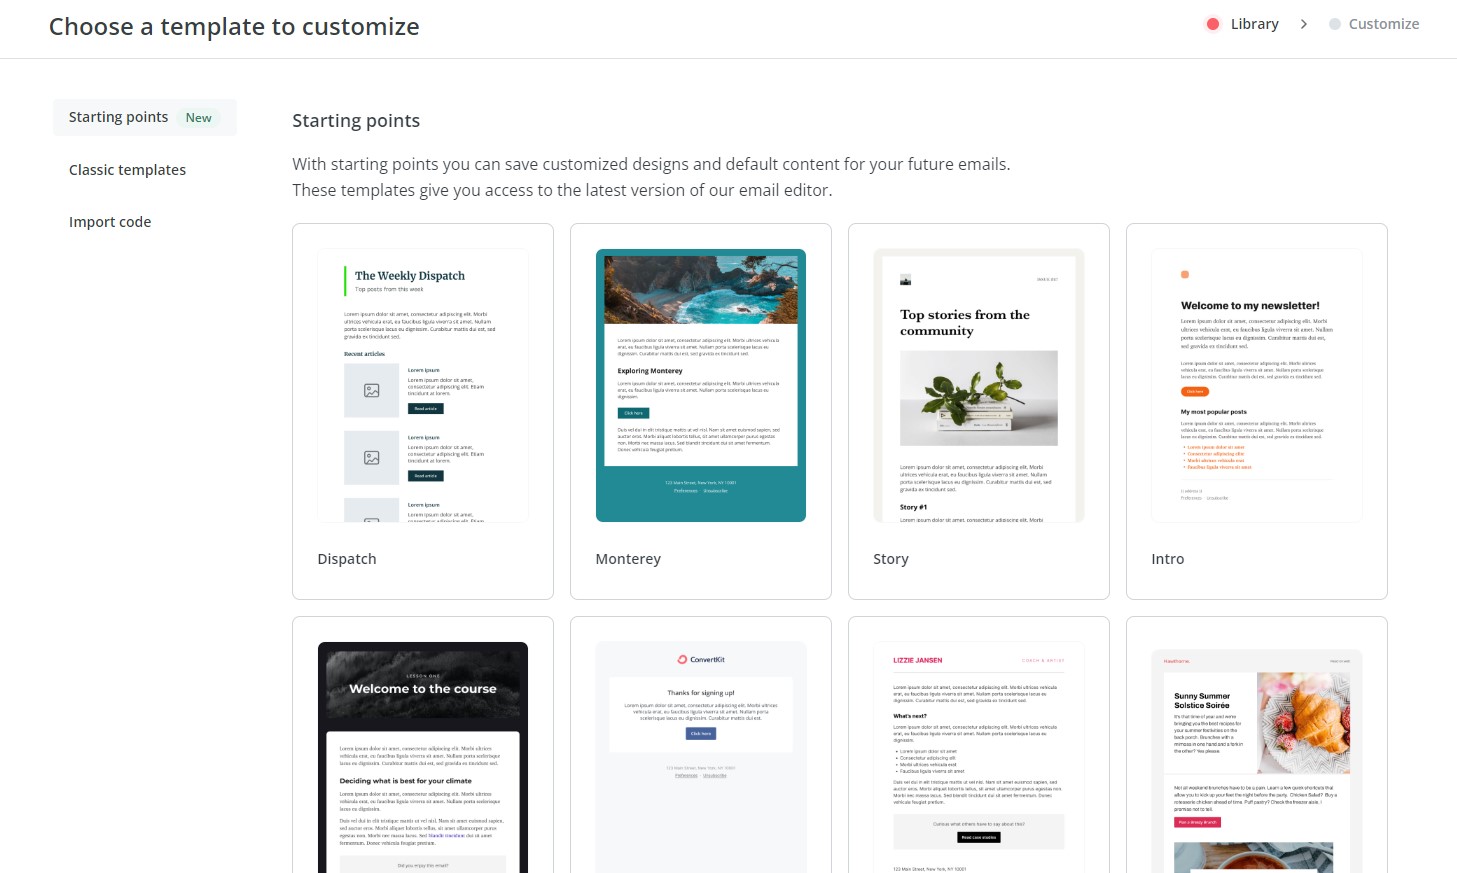 ConverKit branded email templates for customization